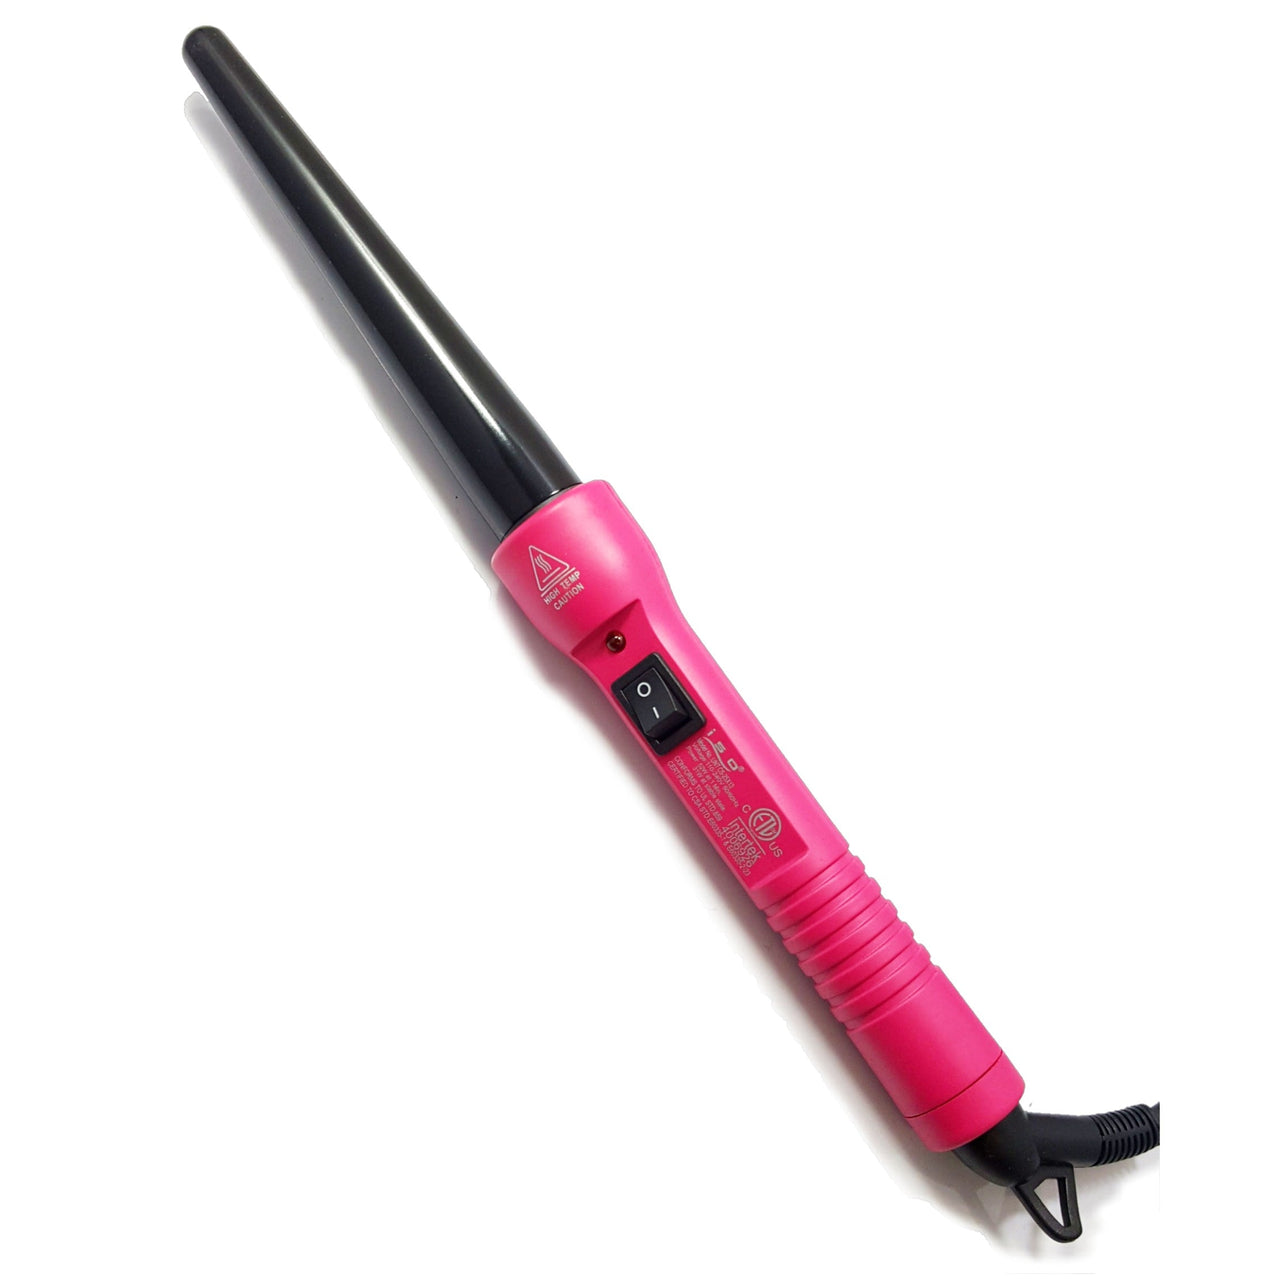 25-13mm Tapered Tourmaline Ceramic Curling Iron Clipless Hair Twister With Protective Glove Pink Black